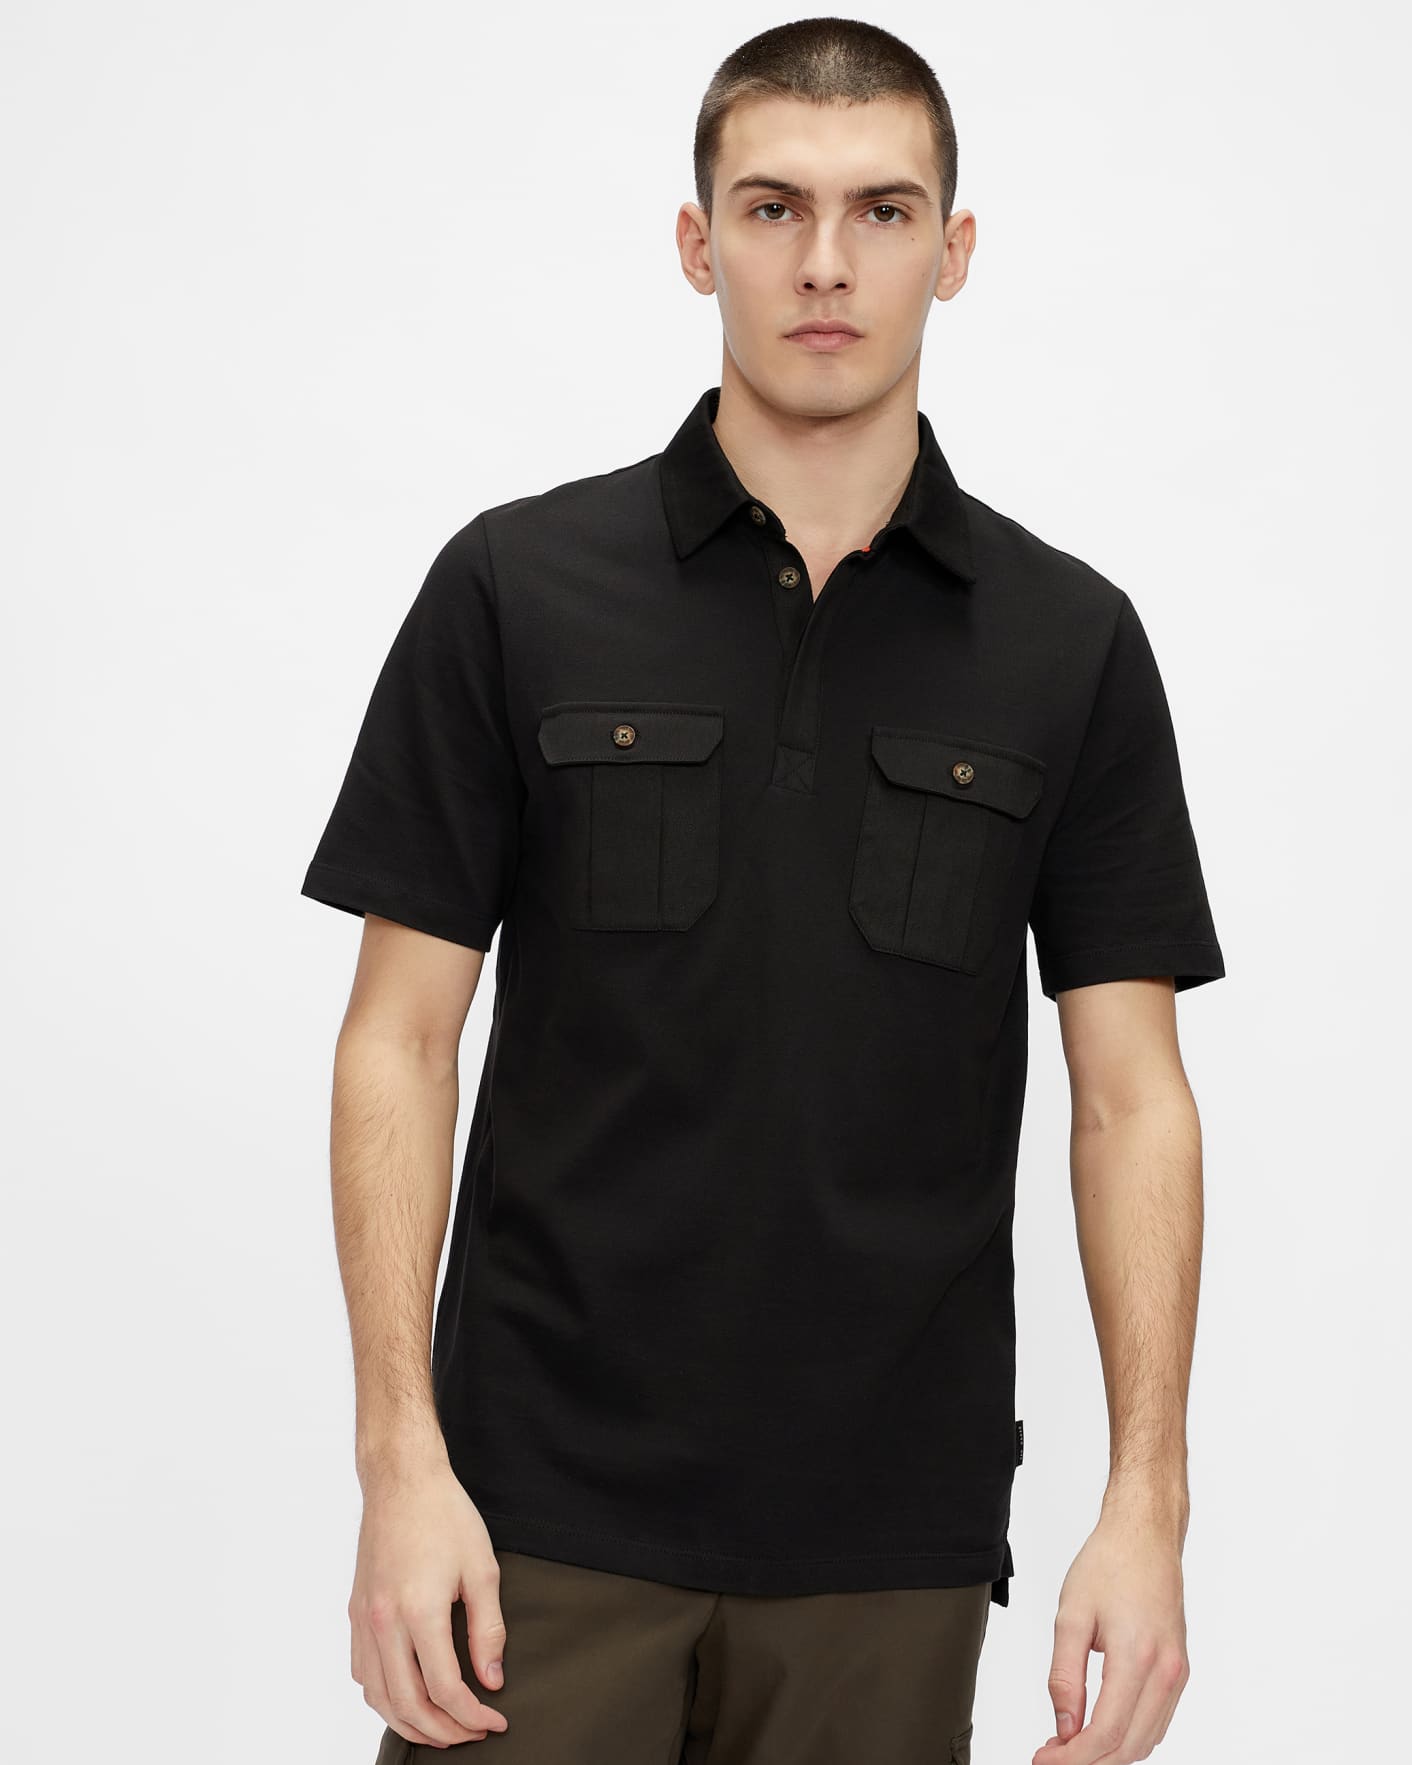 Noir Polo Style Militaire Ted Baker